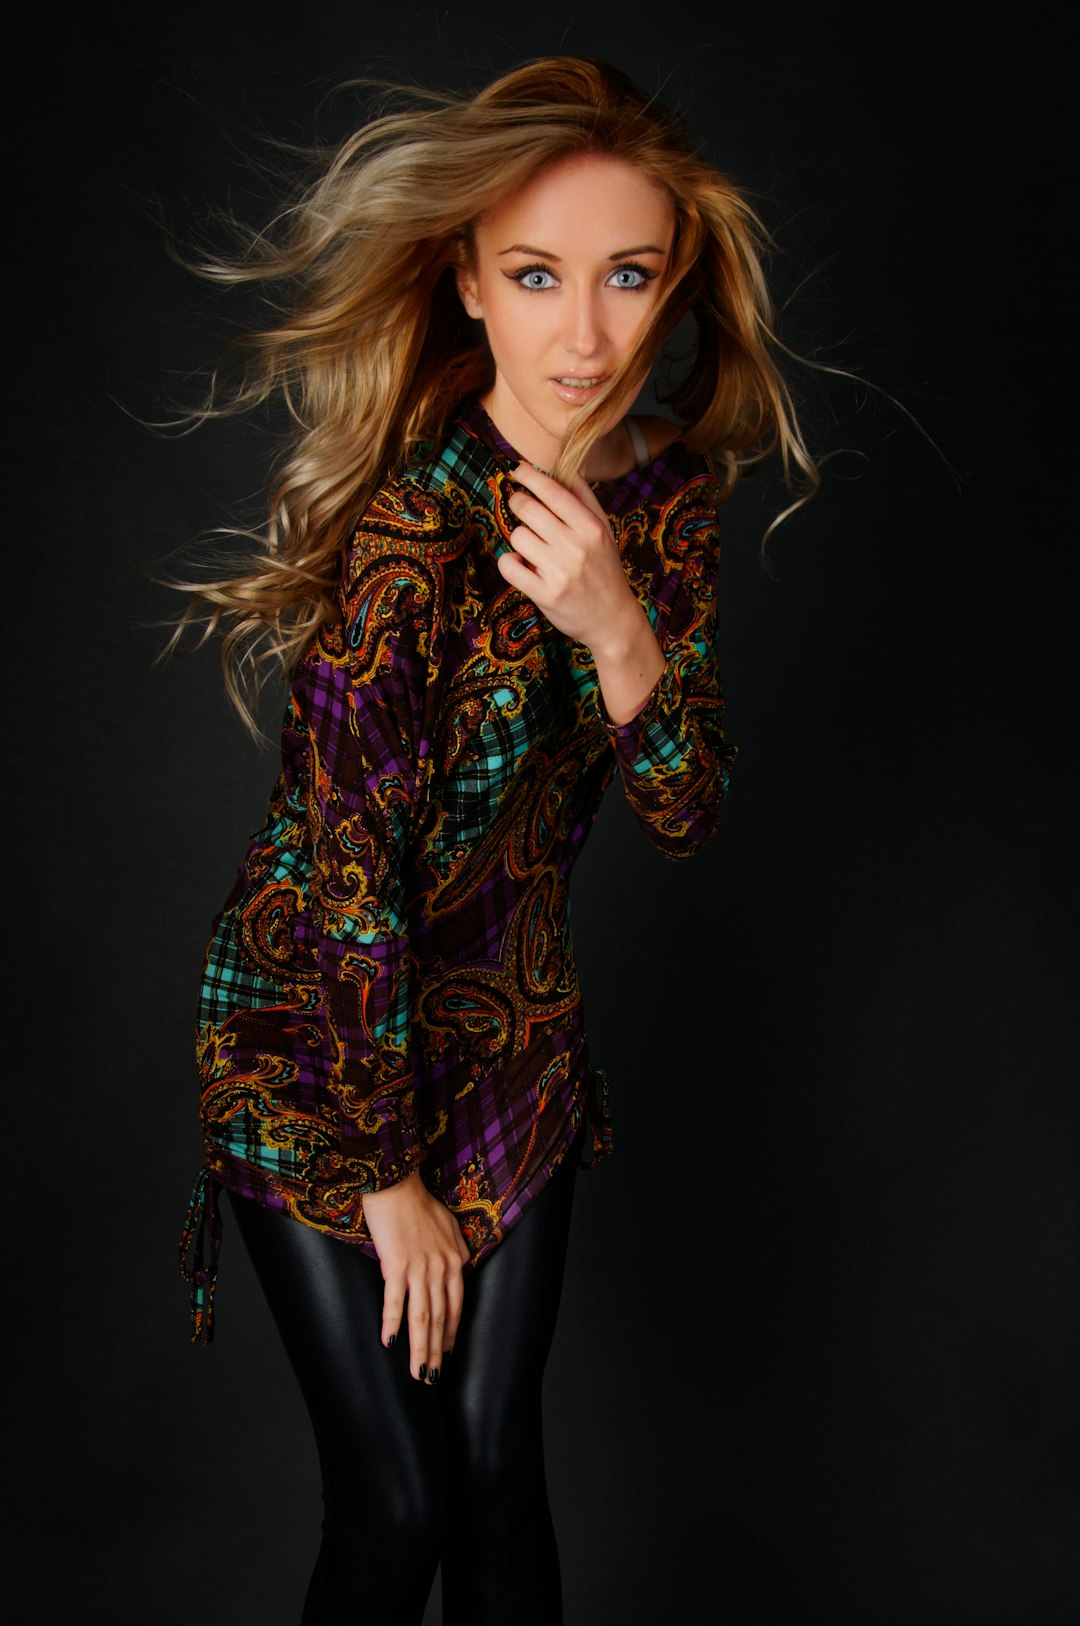 woman wearing multicolored long-sleeved top holding hair